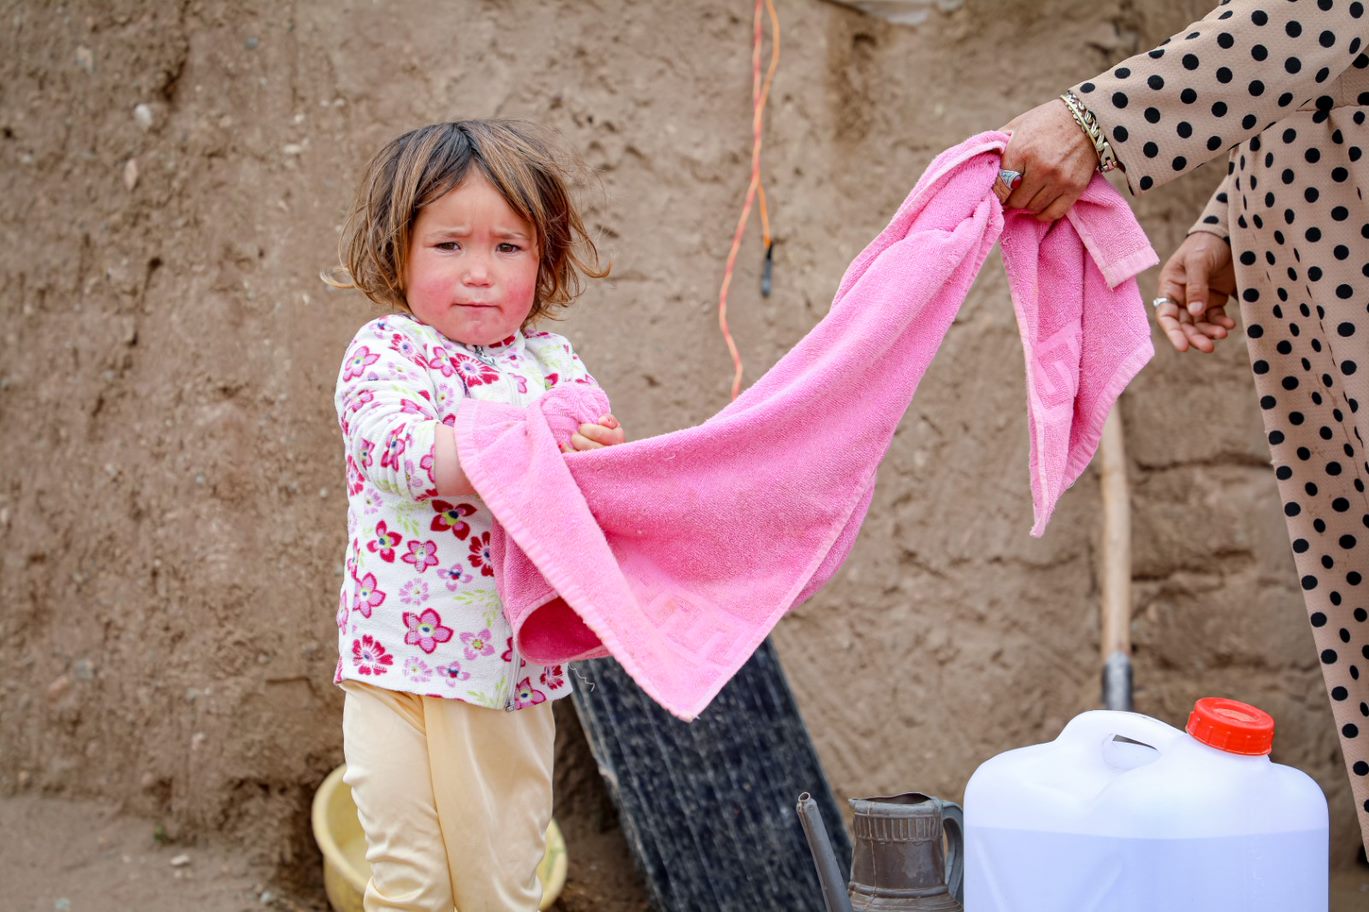 Young refugee child in Afghanistan stands outside, washing their hands with a pink towel and a bottle of water